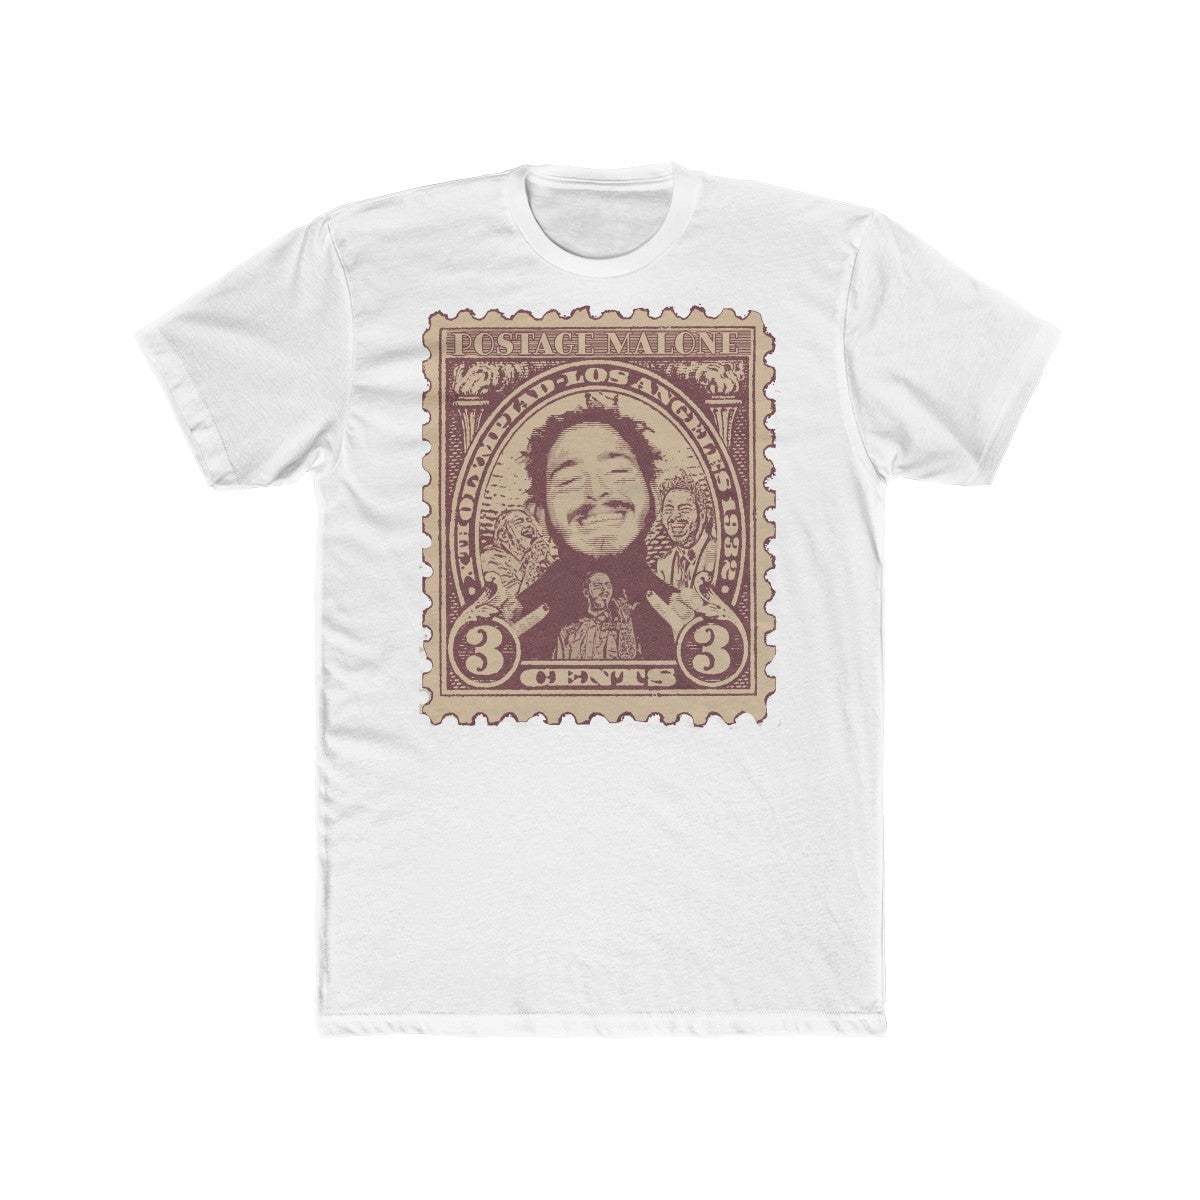 Postage Malone ( Post Malone ) Funny Old Stamp Collage Tee